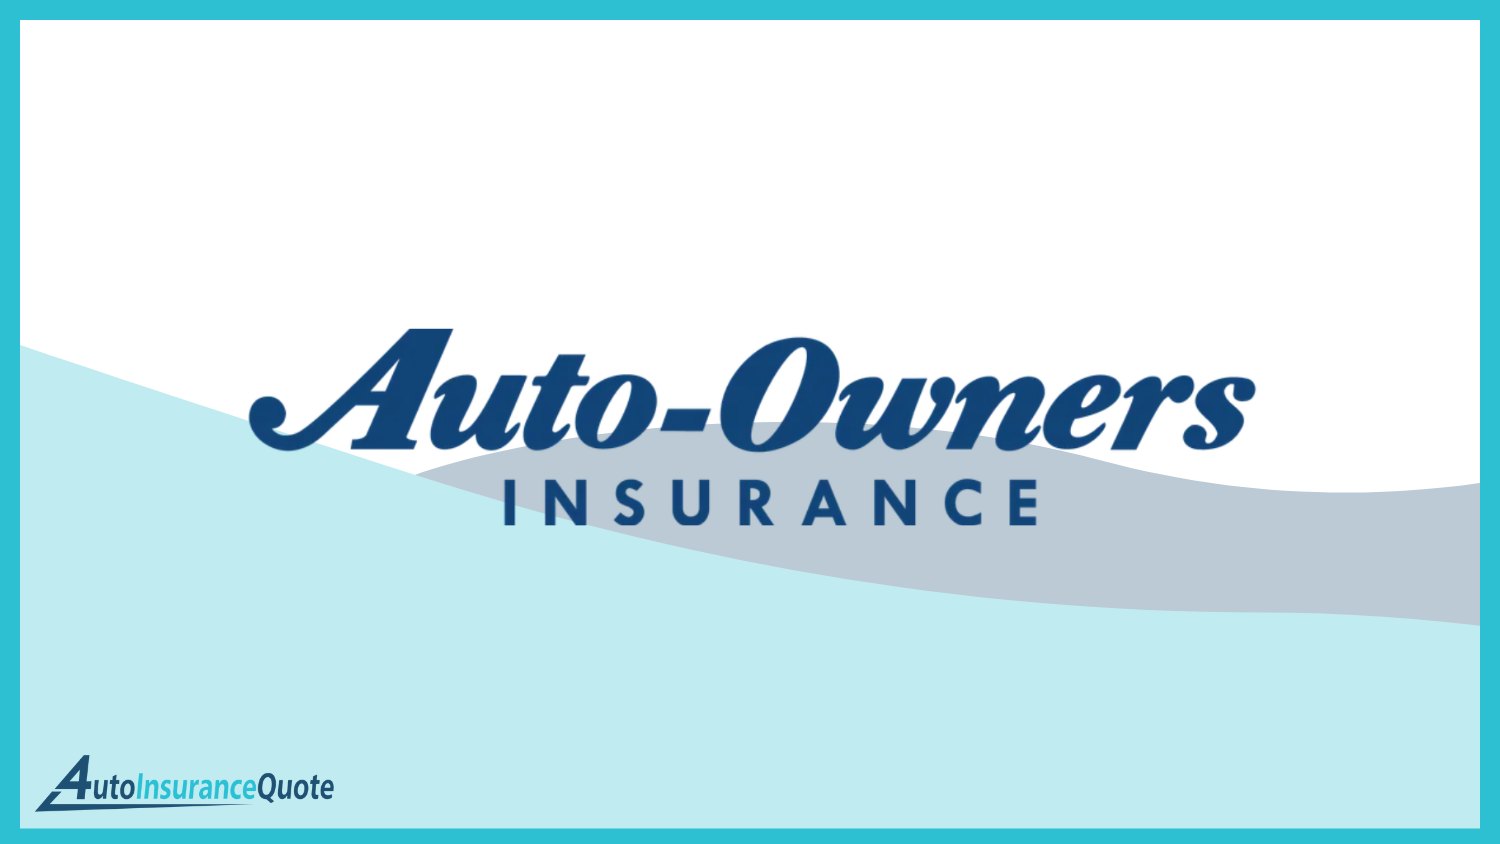 Auto-Owners: Best Auto Insurance for Nannies